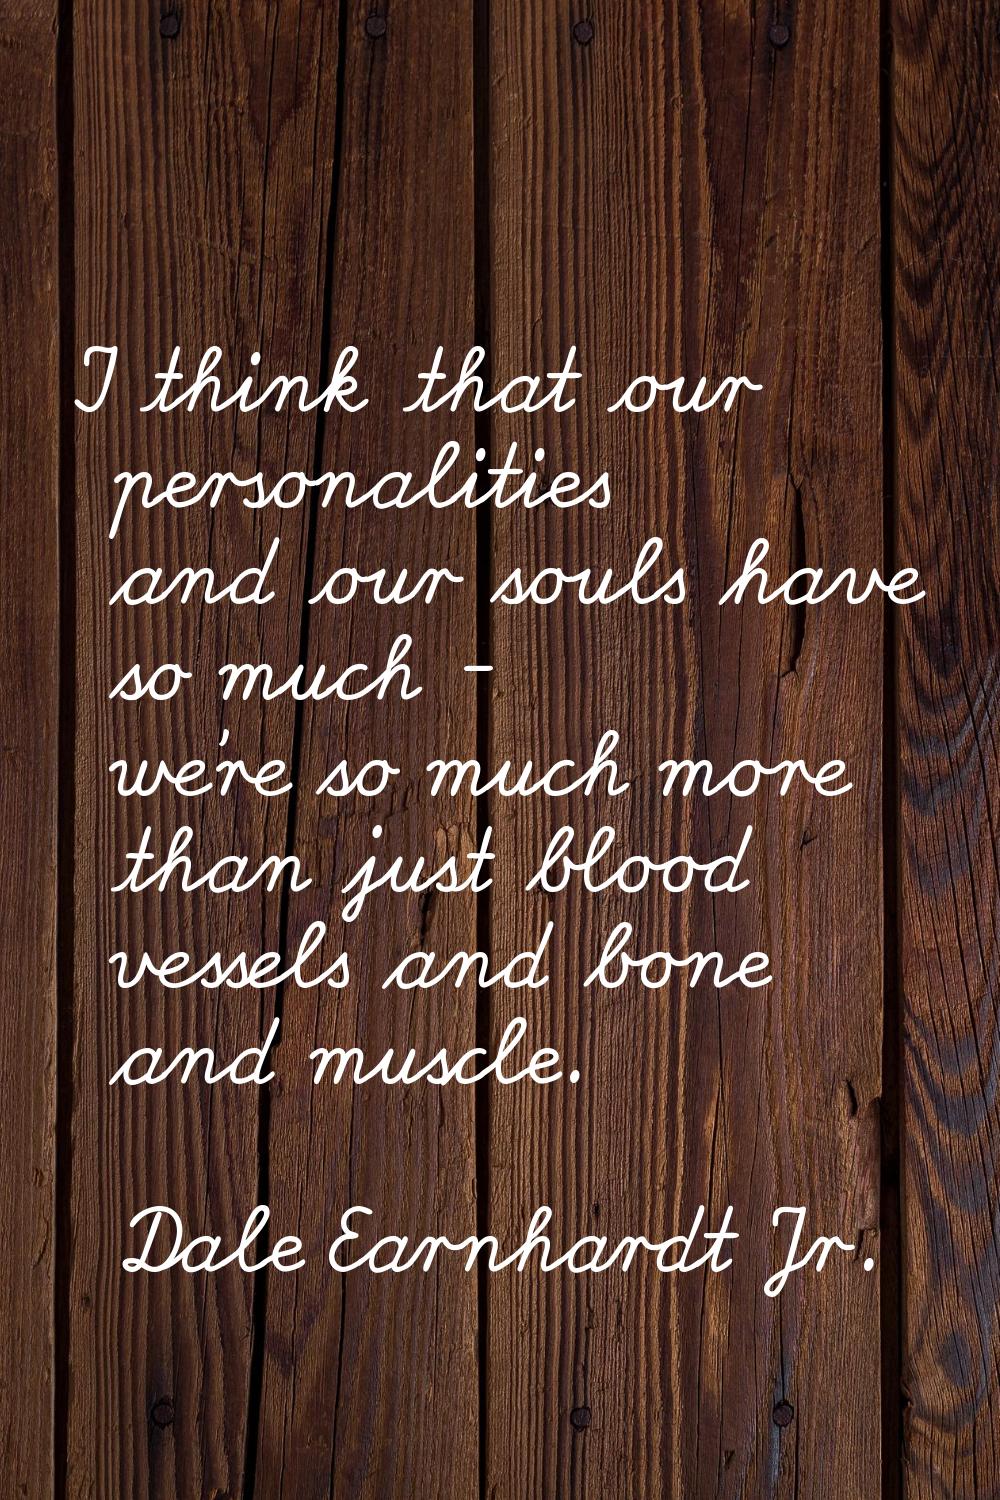 I think that our personalities and our souls have so much - we're so much more than just blood vess